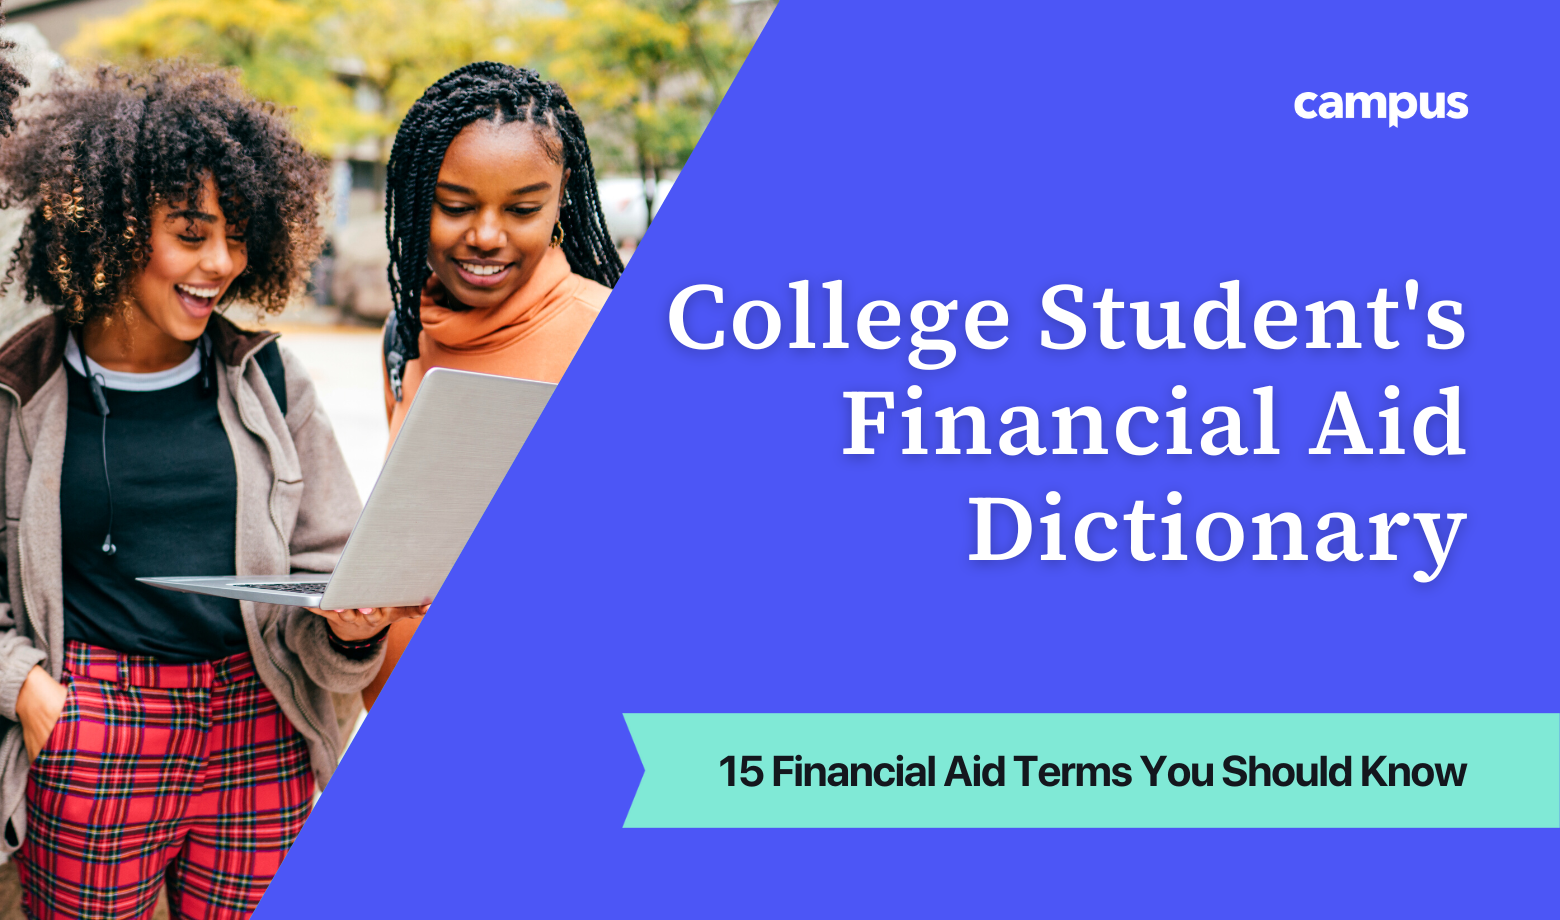 The College Student’s Financial Aid Dictionary: 15 Terms You Should Know